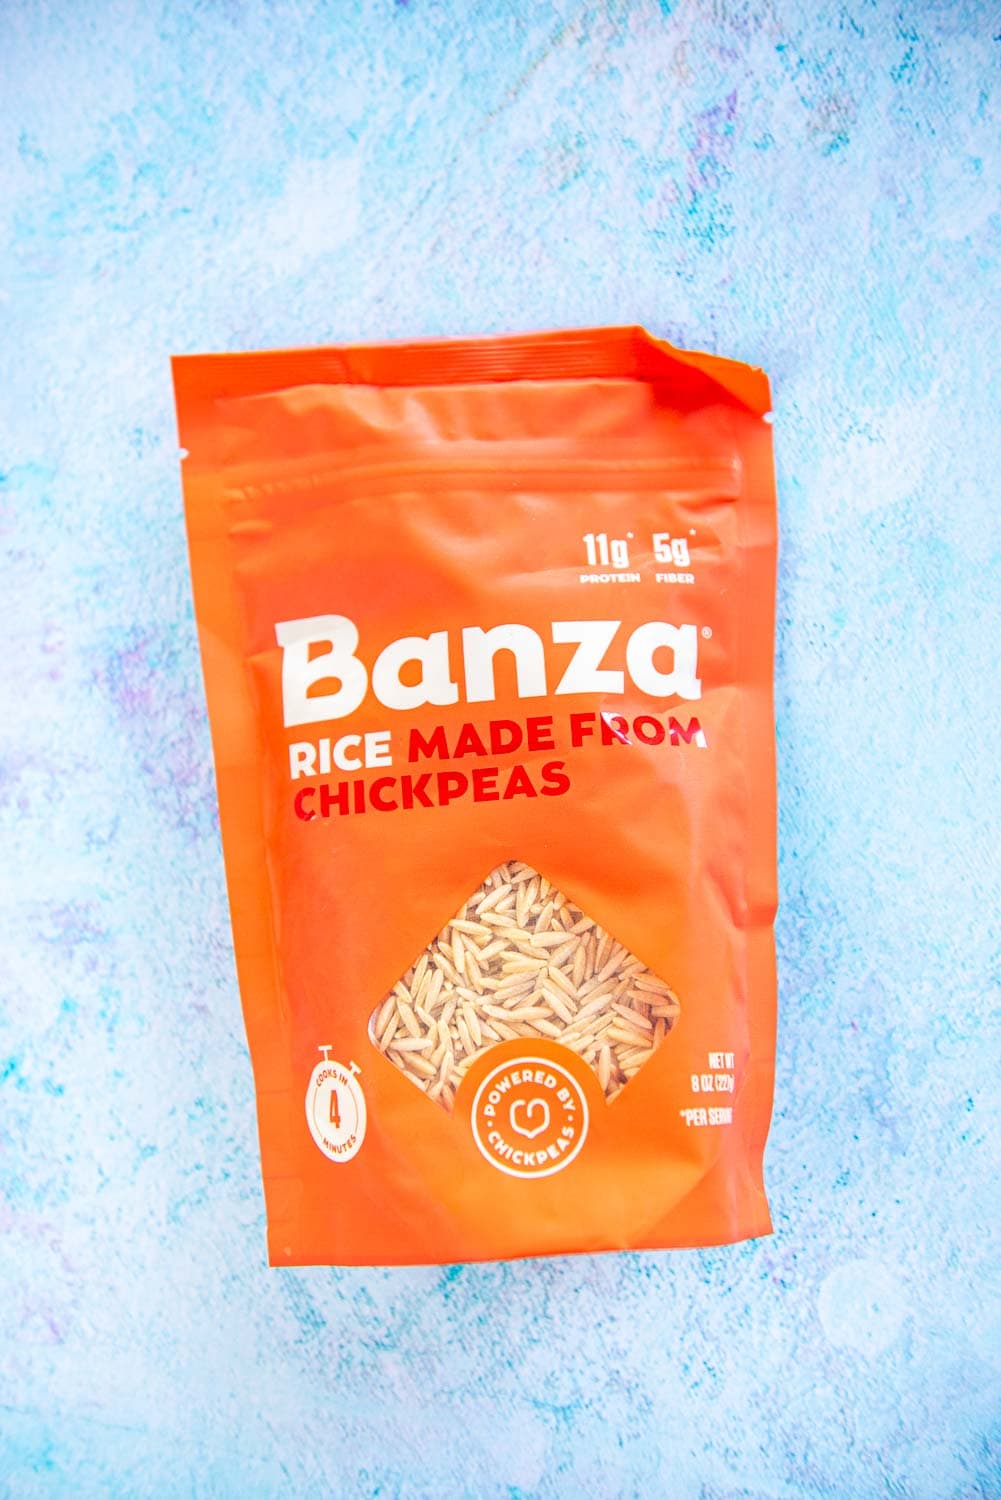 Banza rice made from chickpeas